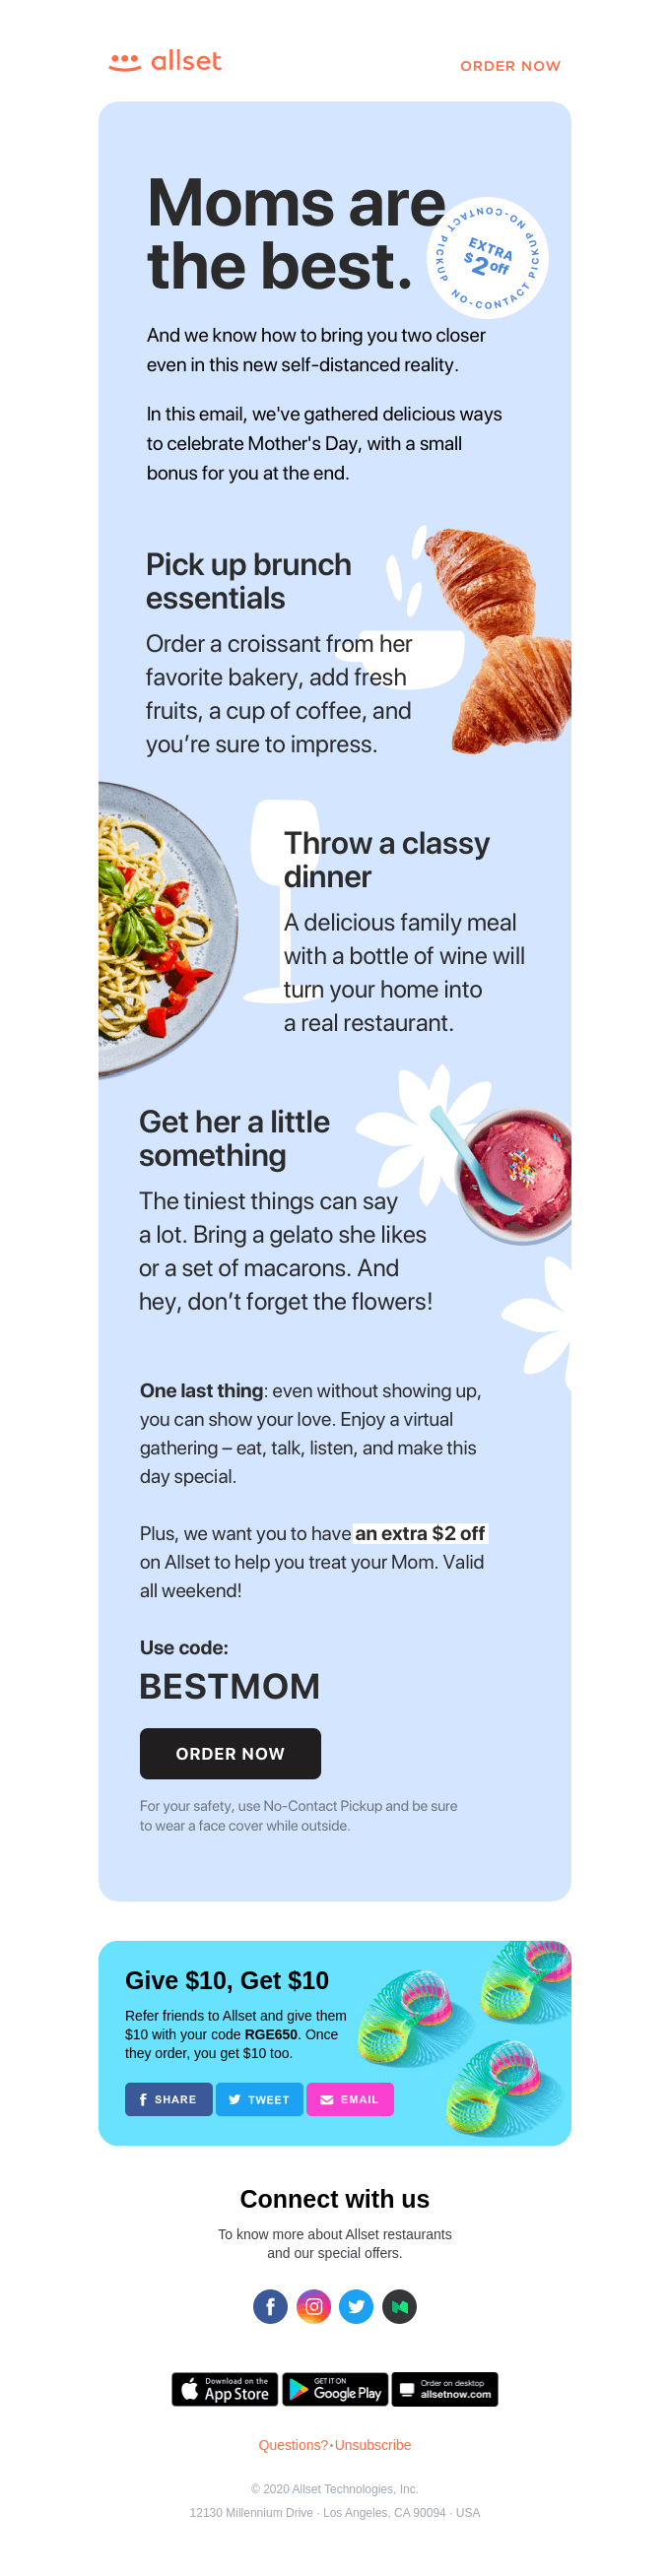 Mother’s day email example by Allset